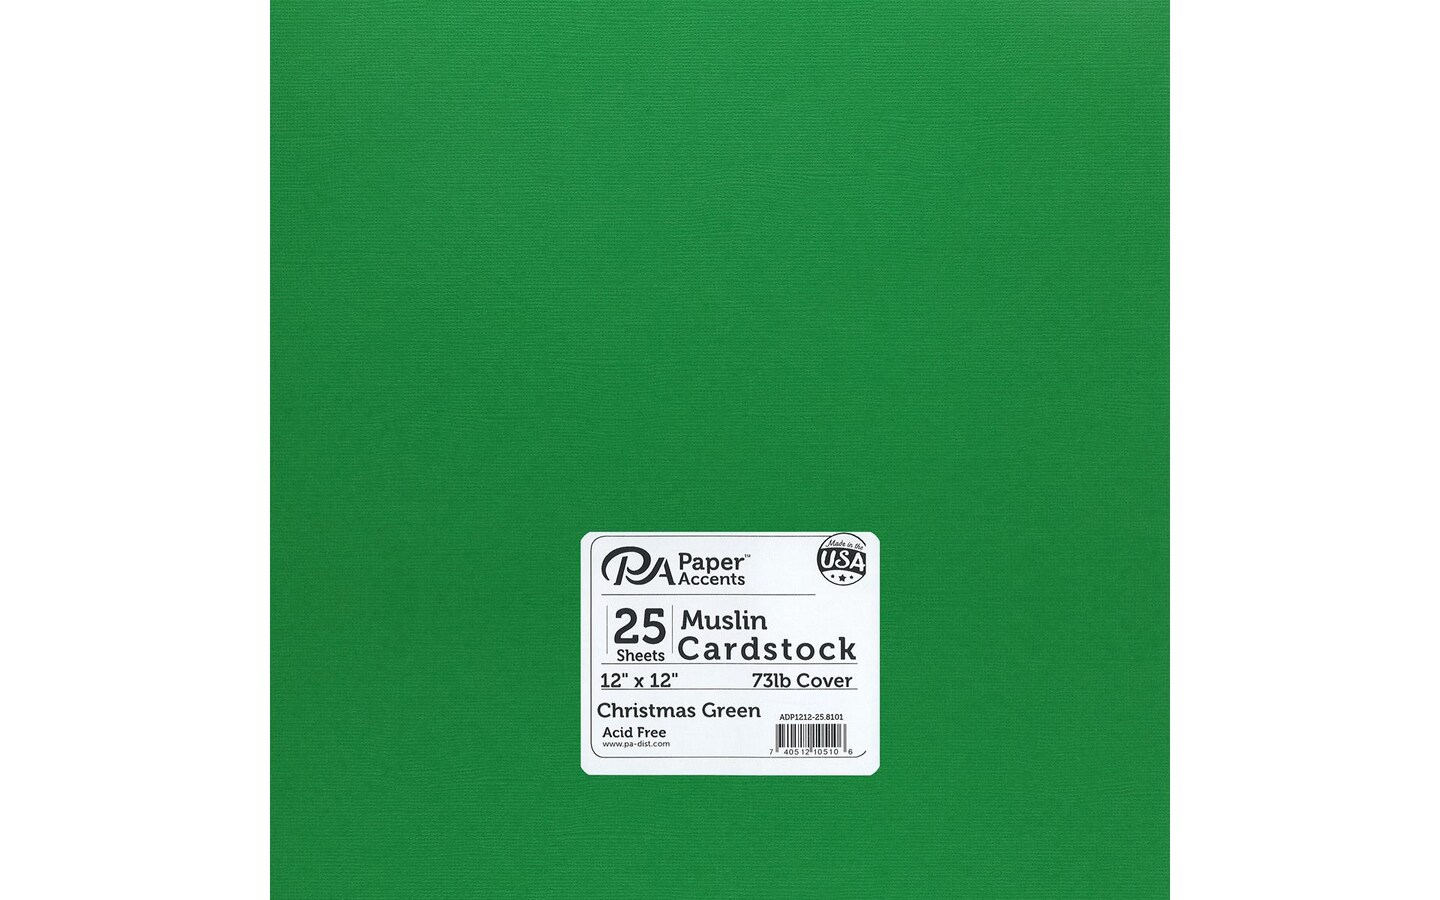 PA Paper Accents Textured Cardstock 12 x 12 Christmas Green